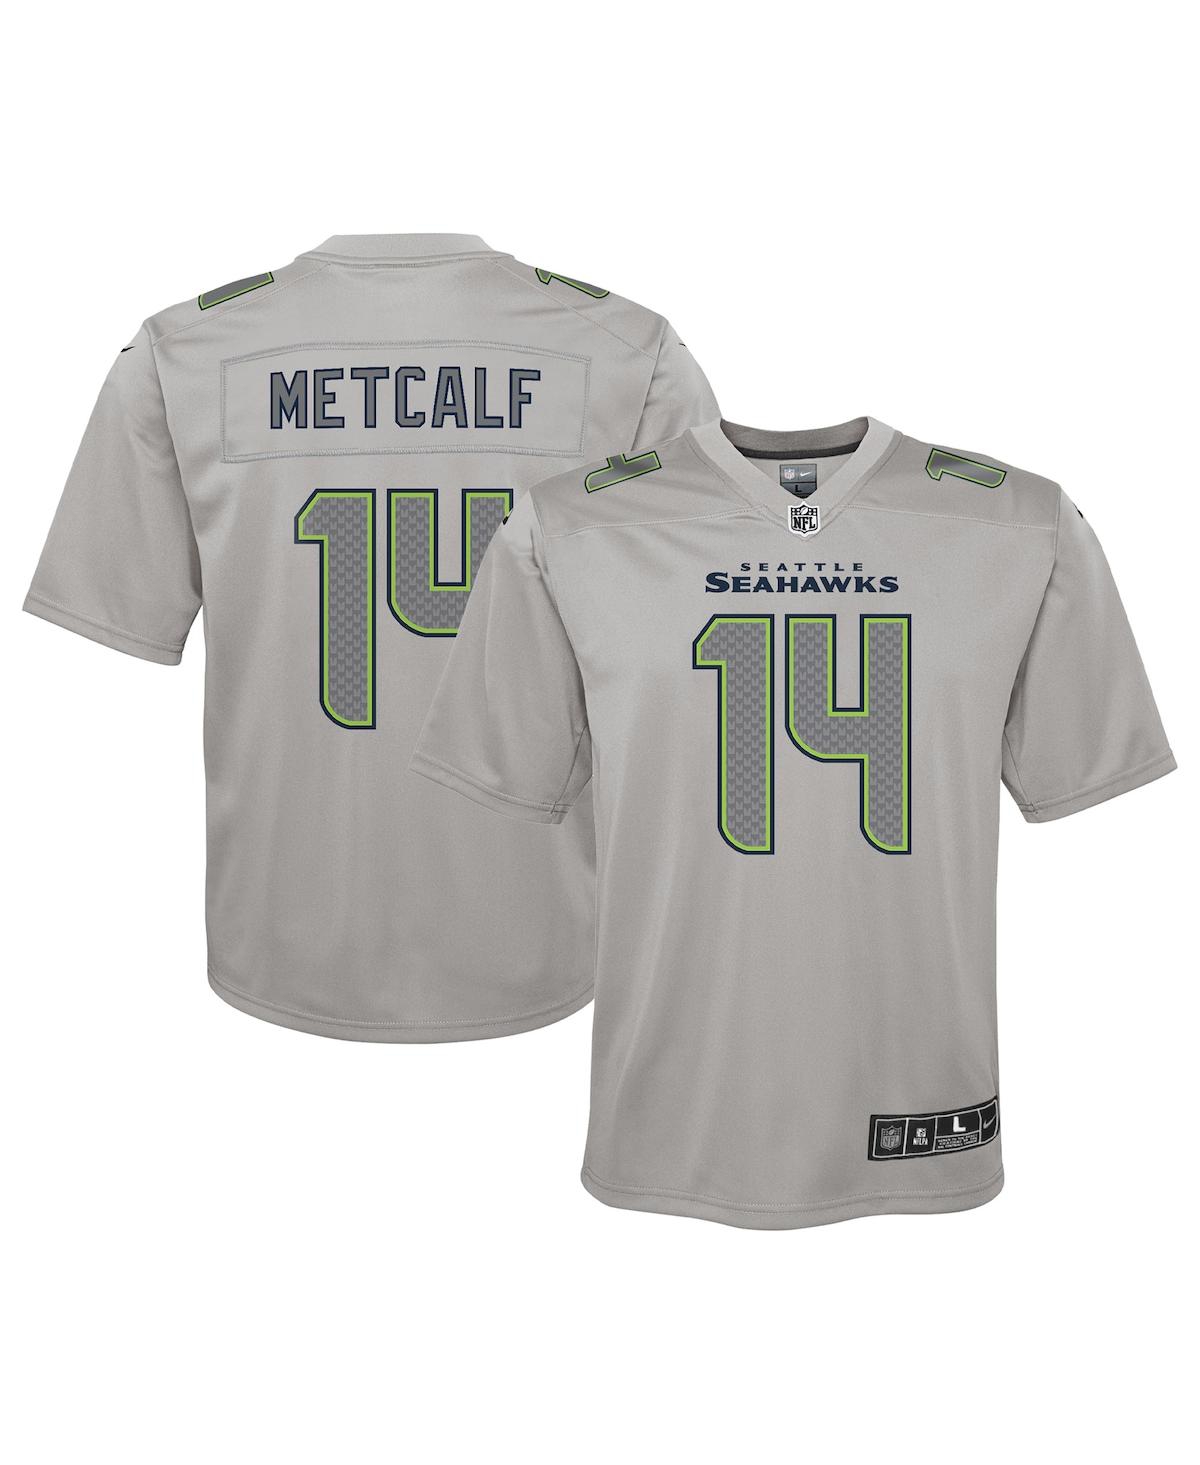 Youth Boys Nike Dk Metcalf Gray Seattle Seahawks Atmosphere Game Jersey